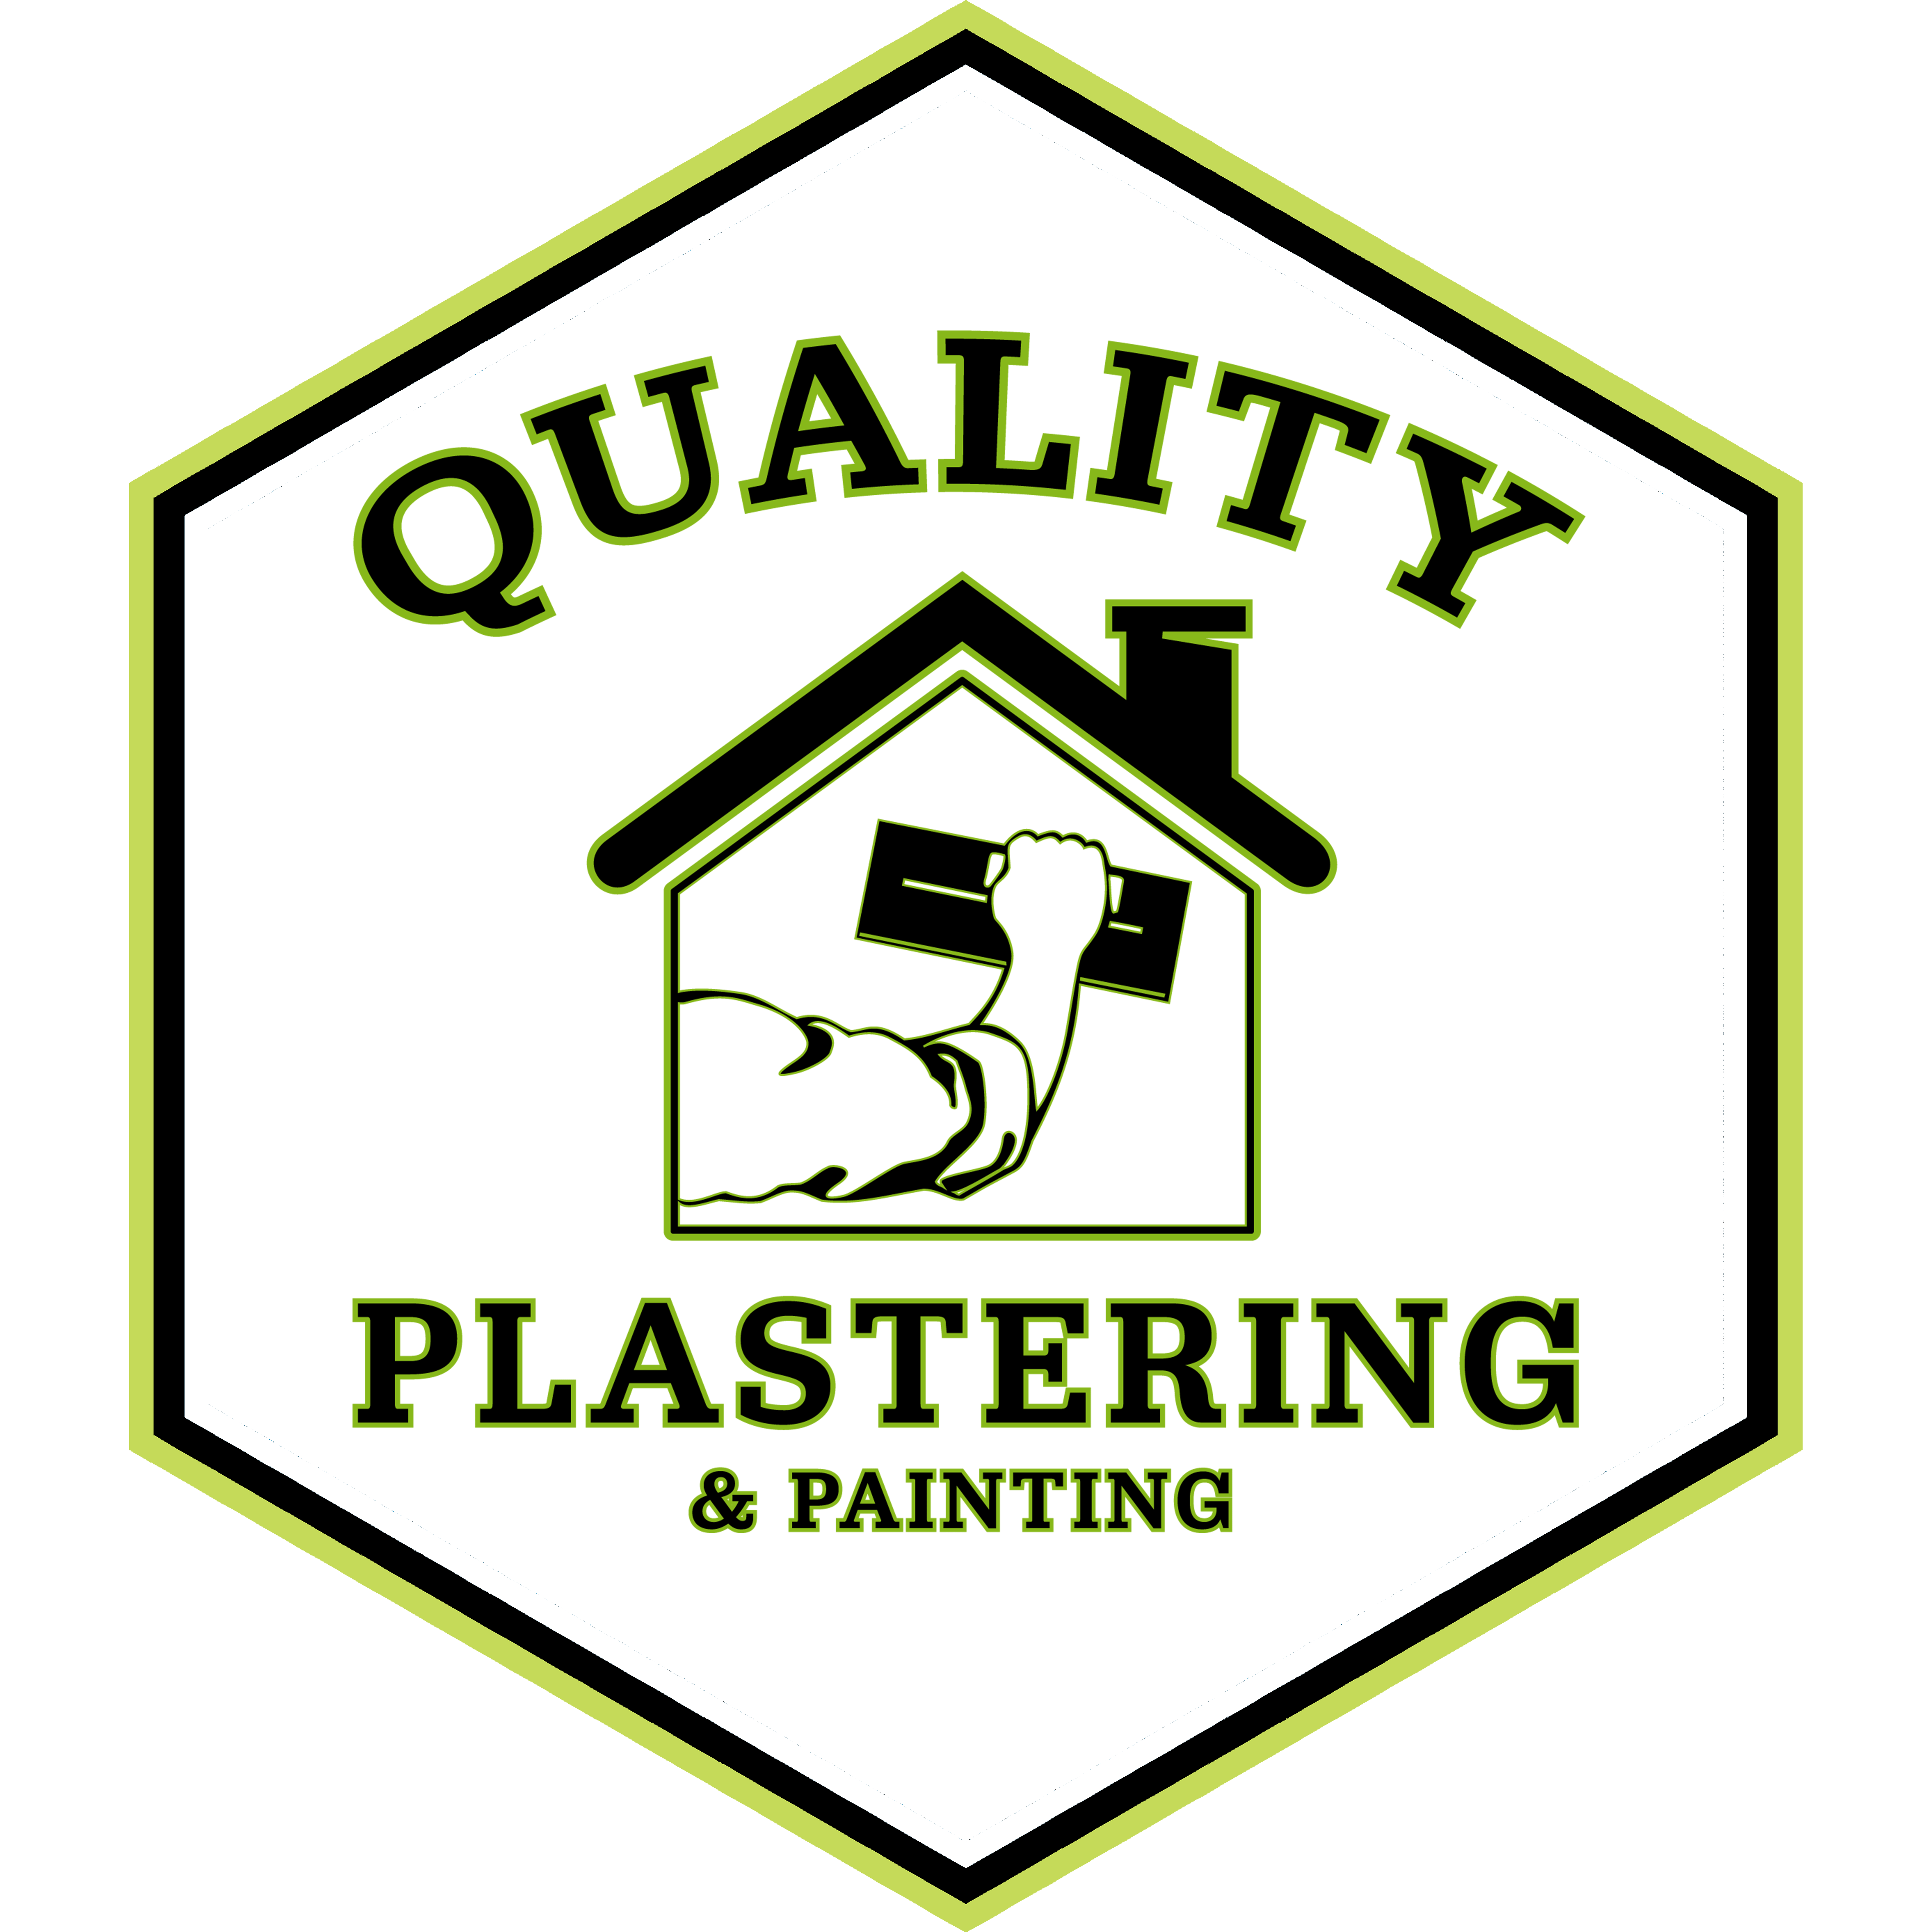 Quality Plastering & Painting - Fairhaven, MA - (508)441-8391 | ShowMeLocal.com